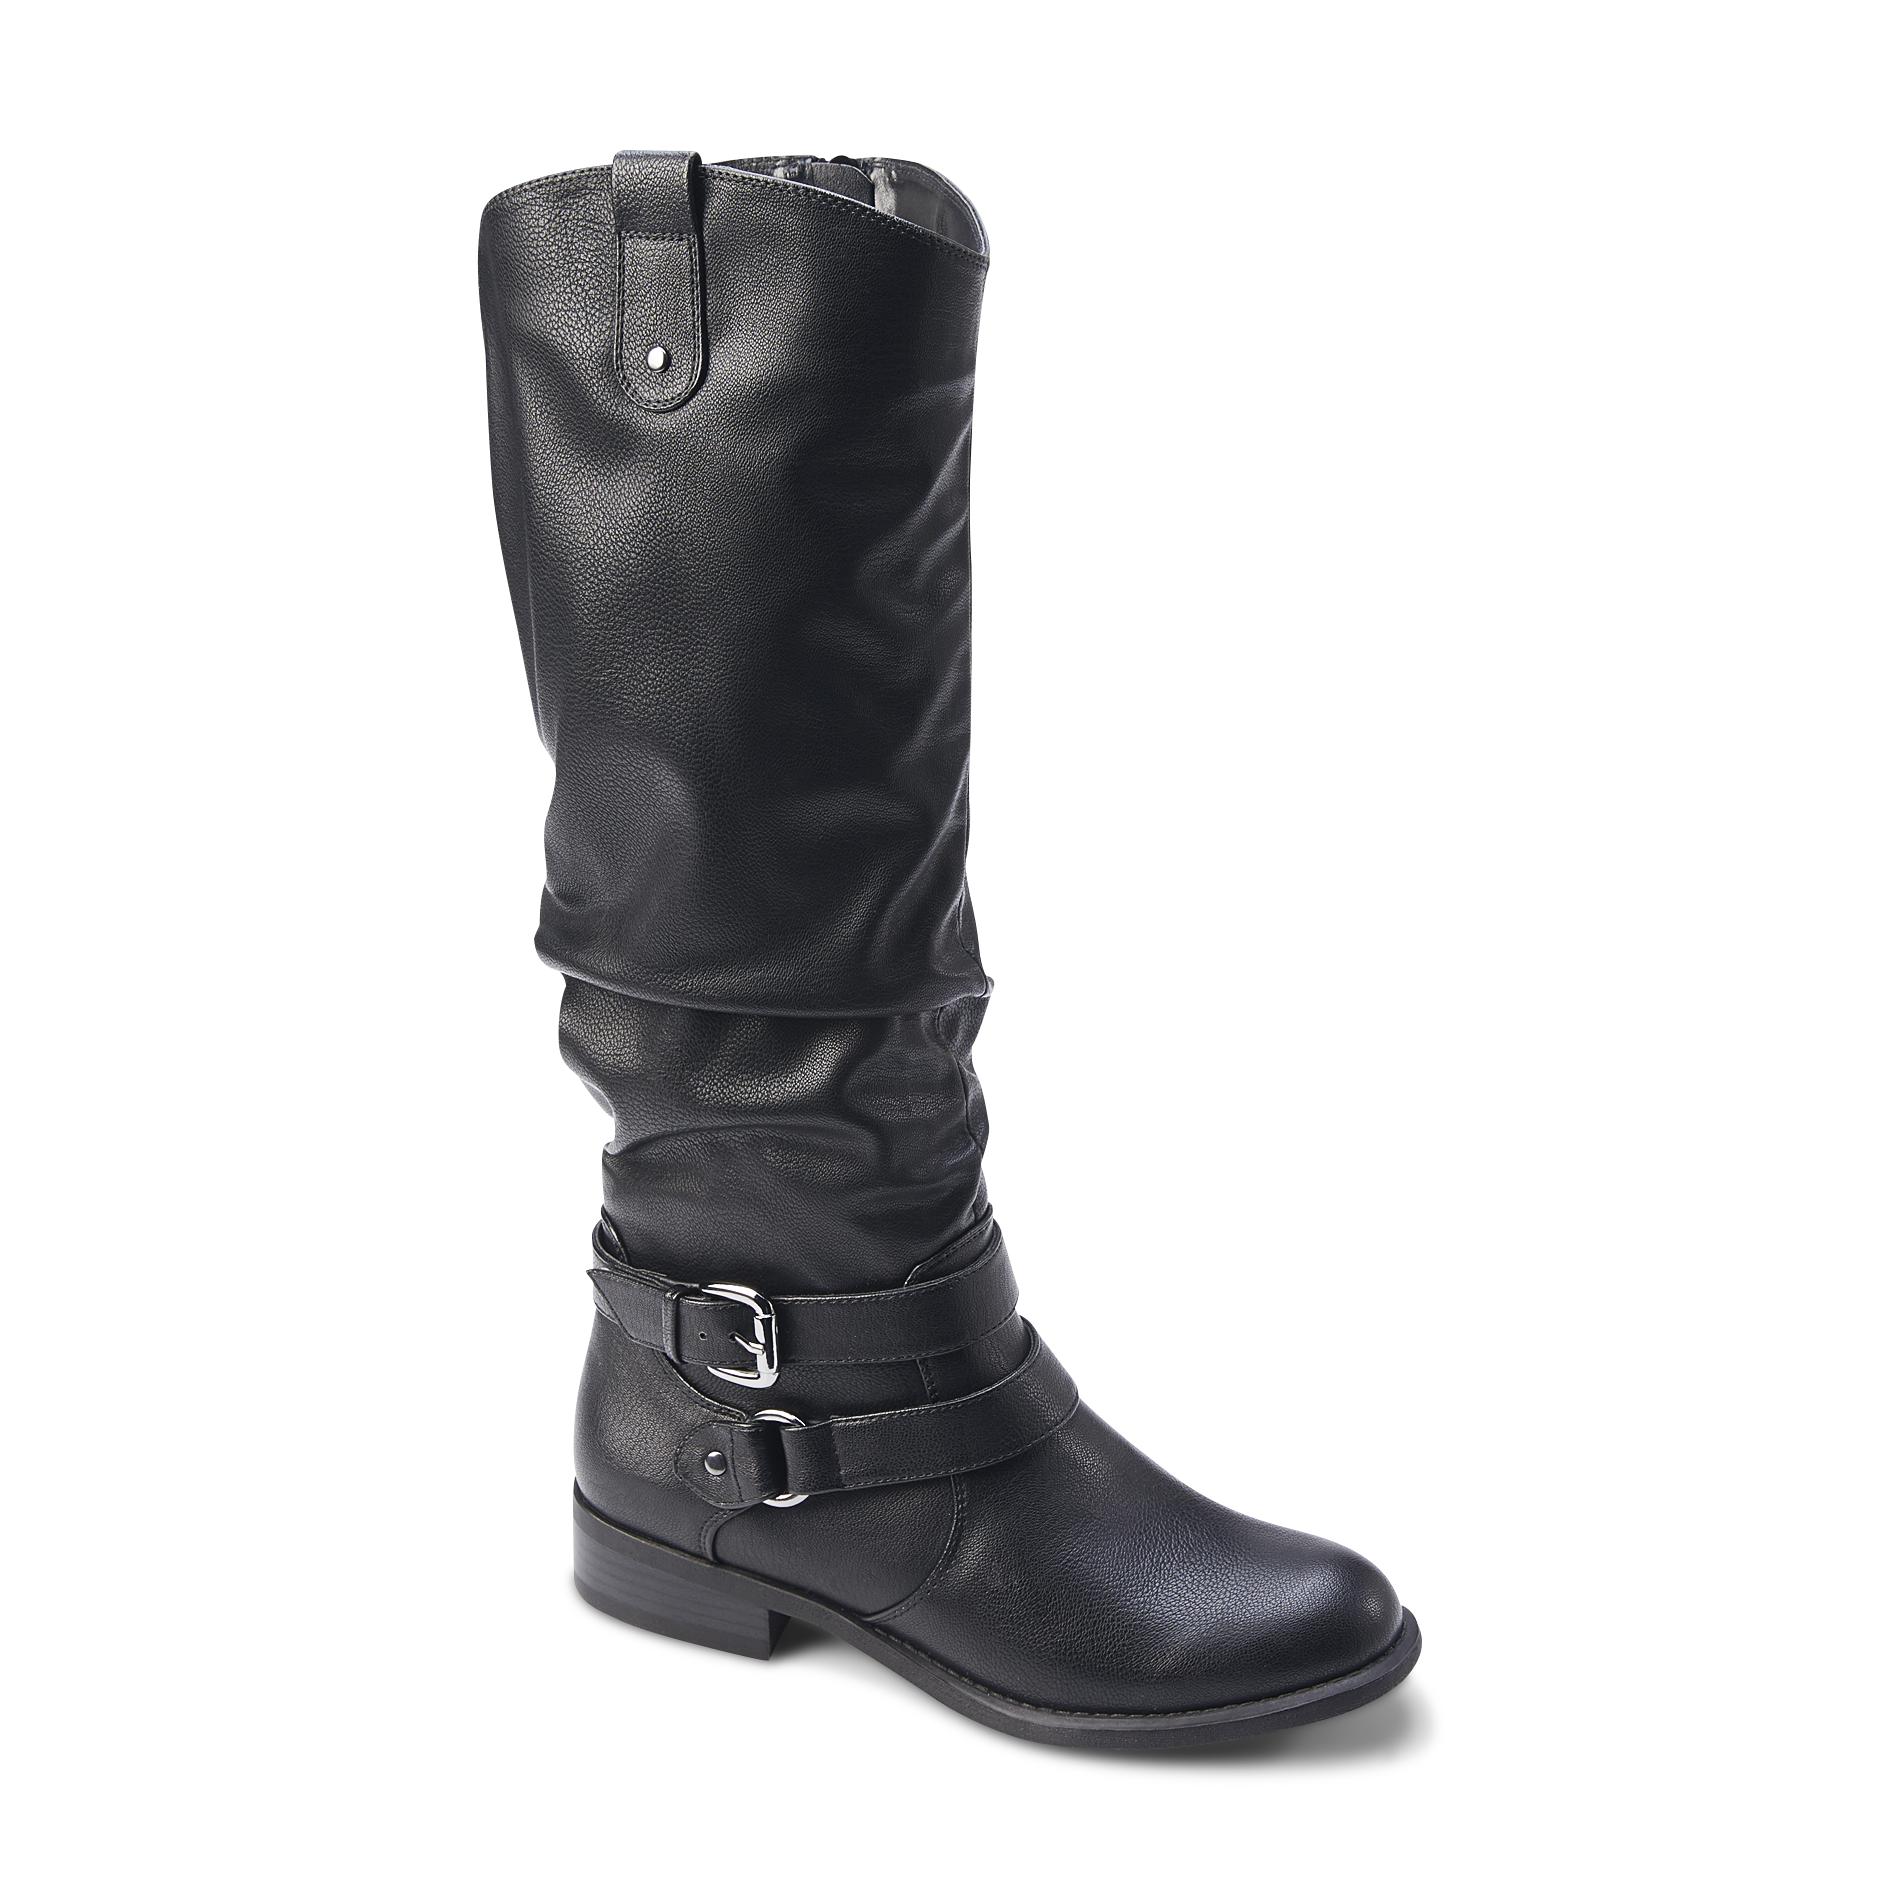 Women's Calf-Length Riding Boot: Find Great Boots at Kmart